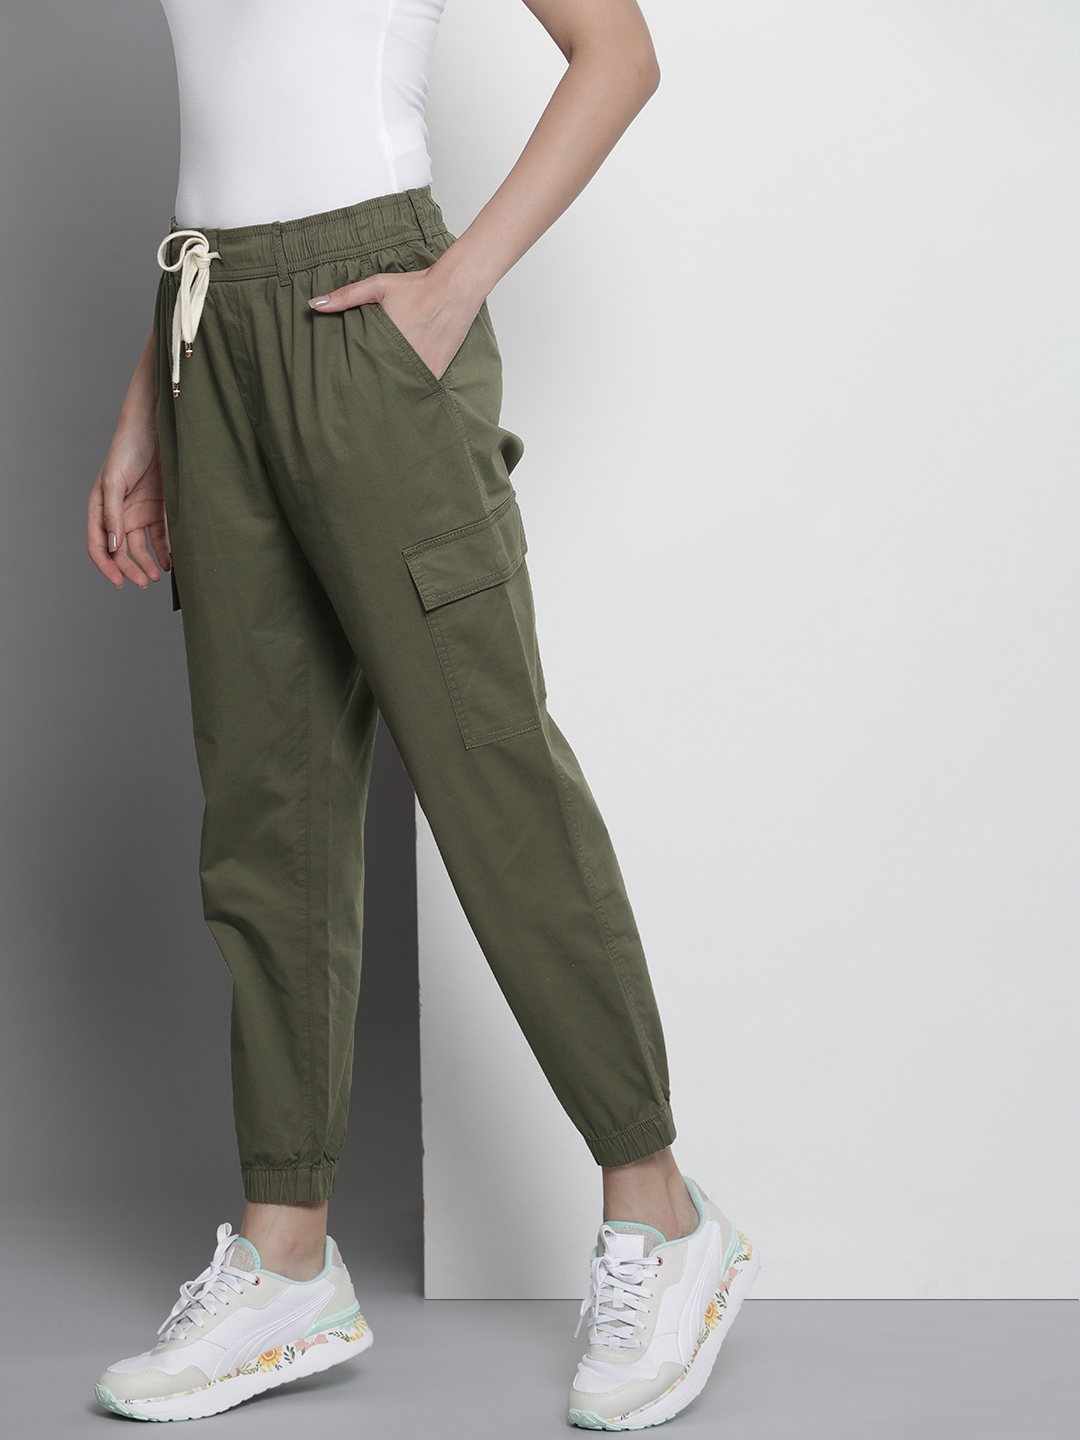 Tommy Hilfiger Jeans - cargo elasticated sweatpants relaxed fit - women -  dstore online